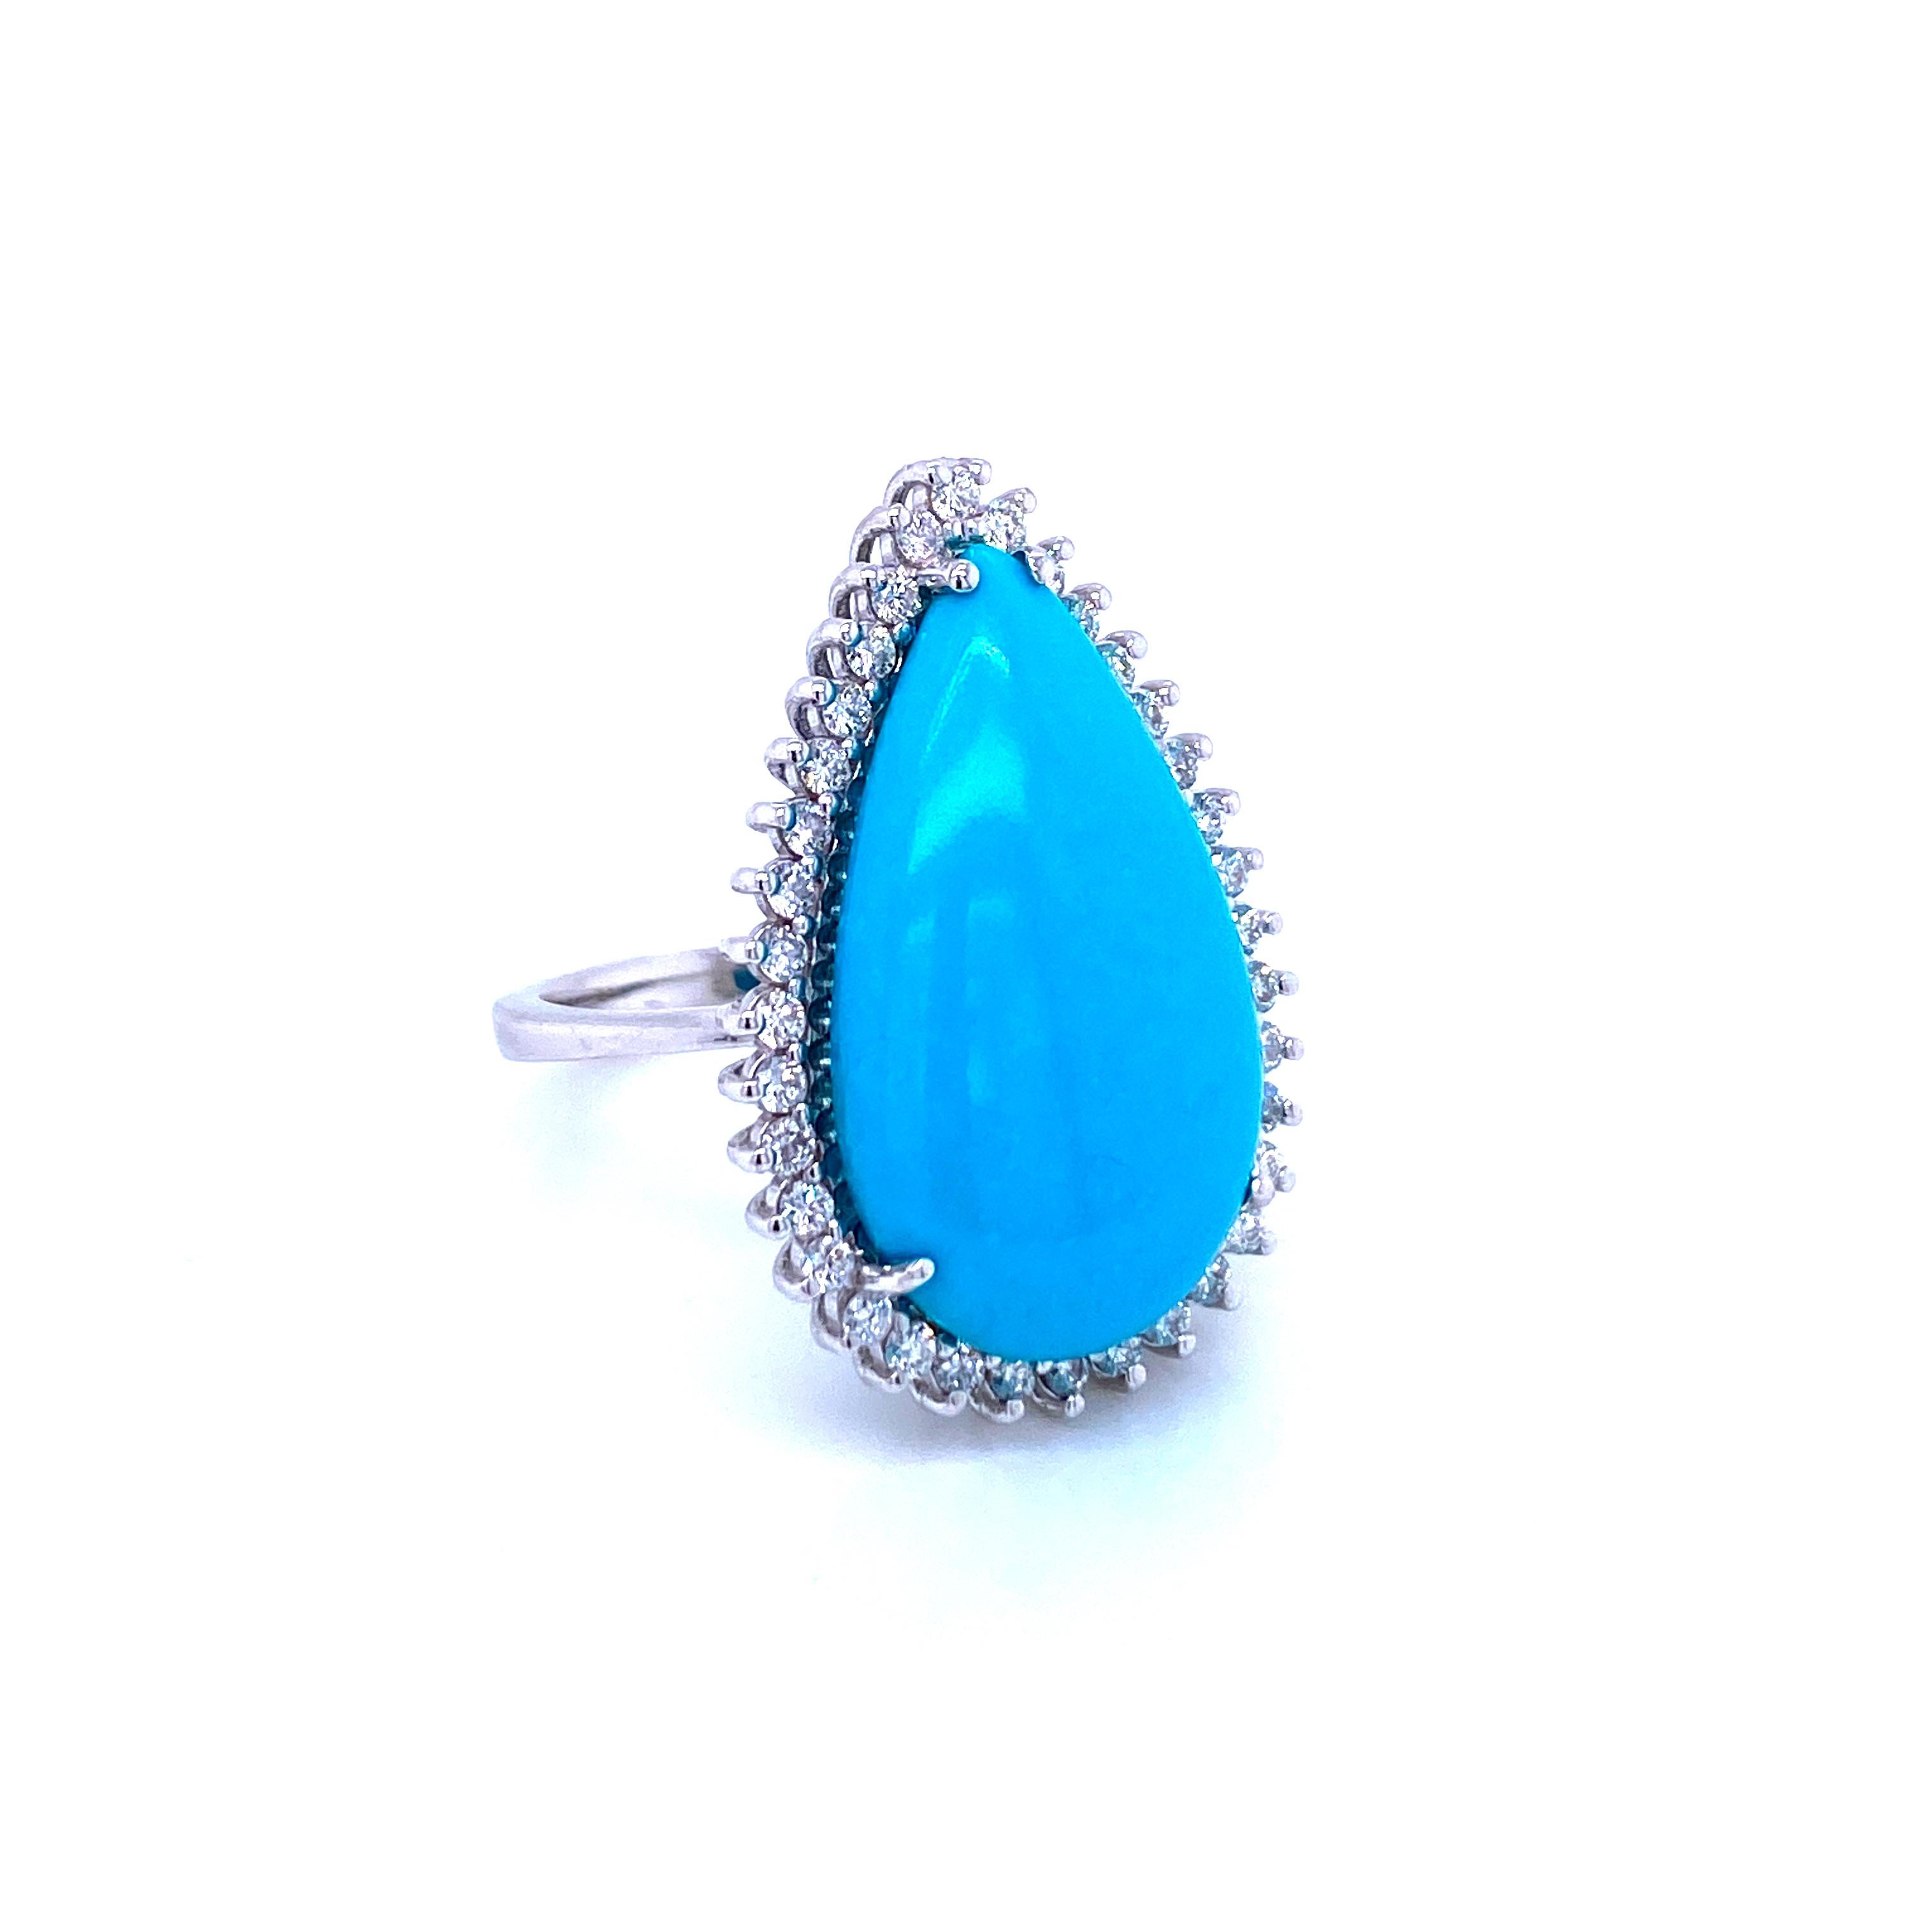 Beautiful cocktail summer ring set with a Great quality and large dimensions rare Natural Turquoise of 3,50 grams and a selection of brilliant cut Diamonds of fine quality, total weight 0,65 Ct rated G/H VVS, tested and guaranteed
Made of solid 18k